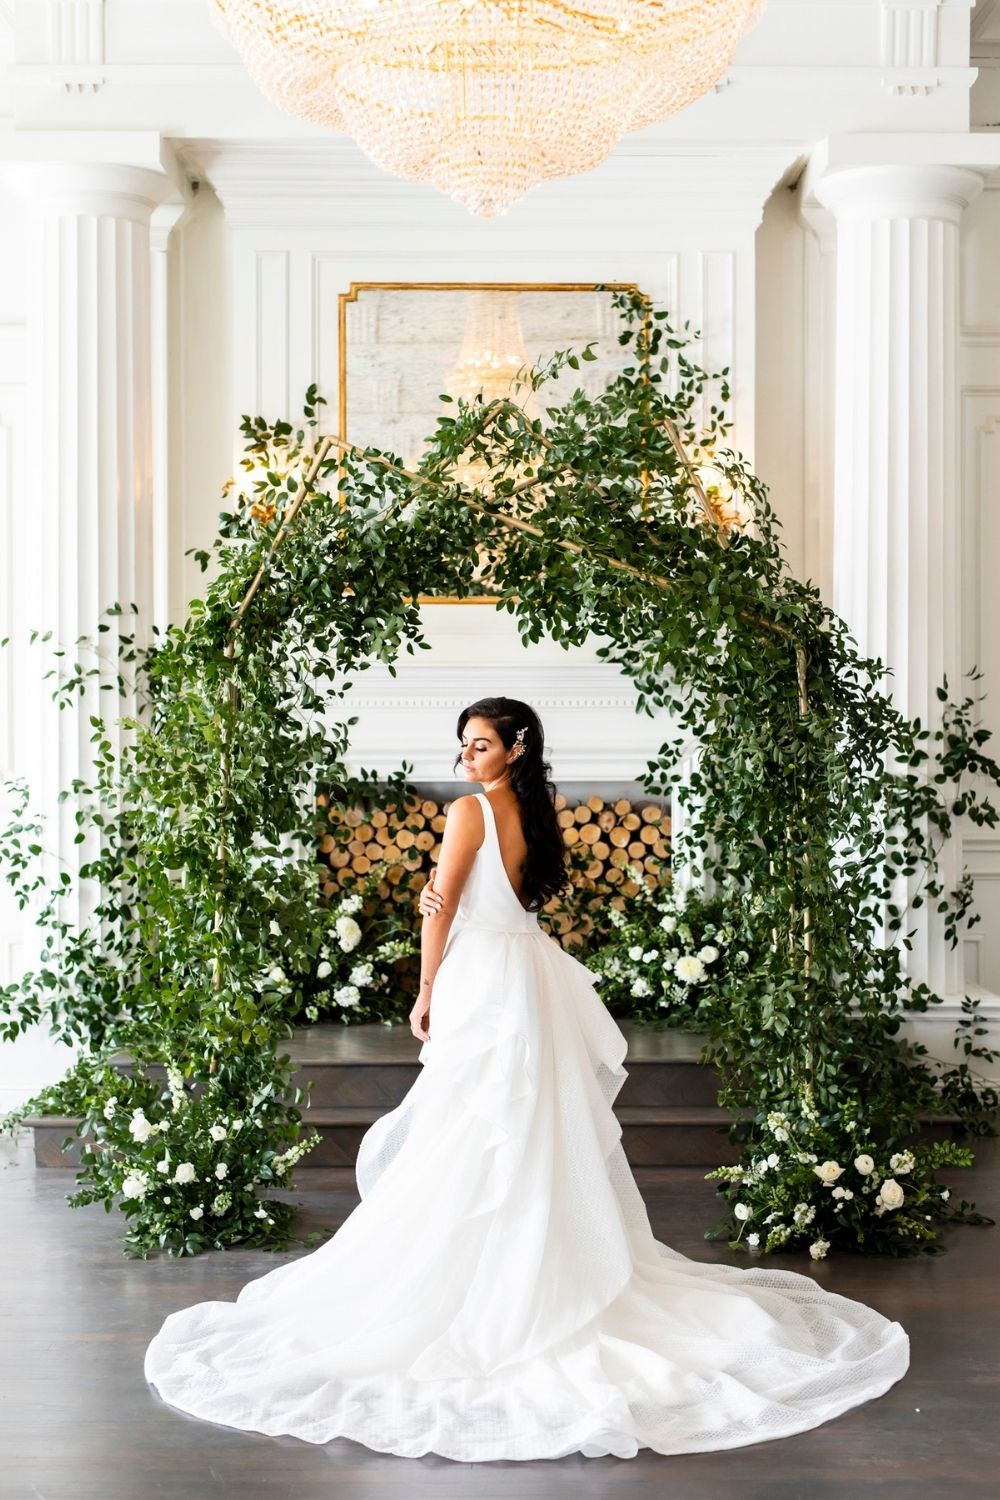 Bride in a white wedding gown with green and gold ceremony arch